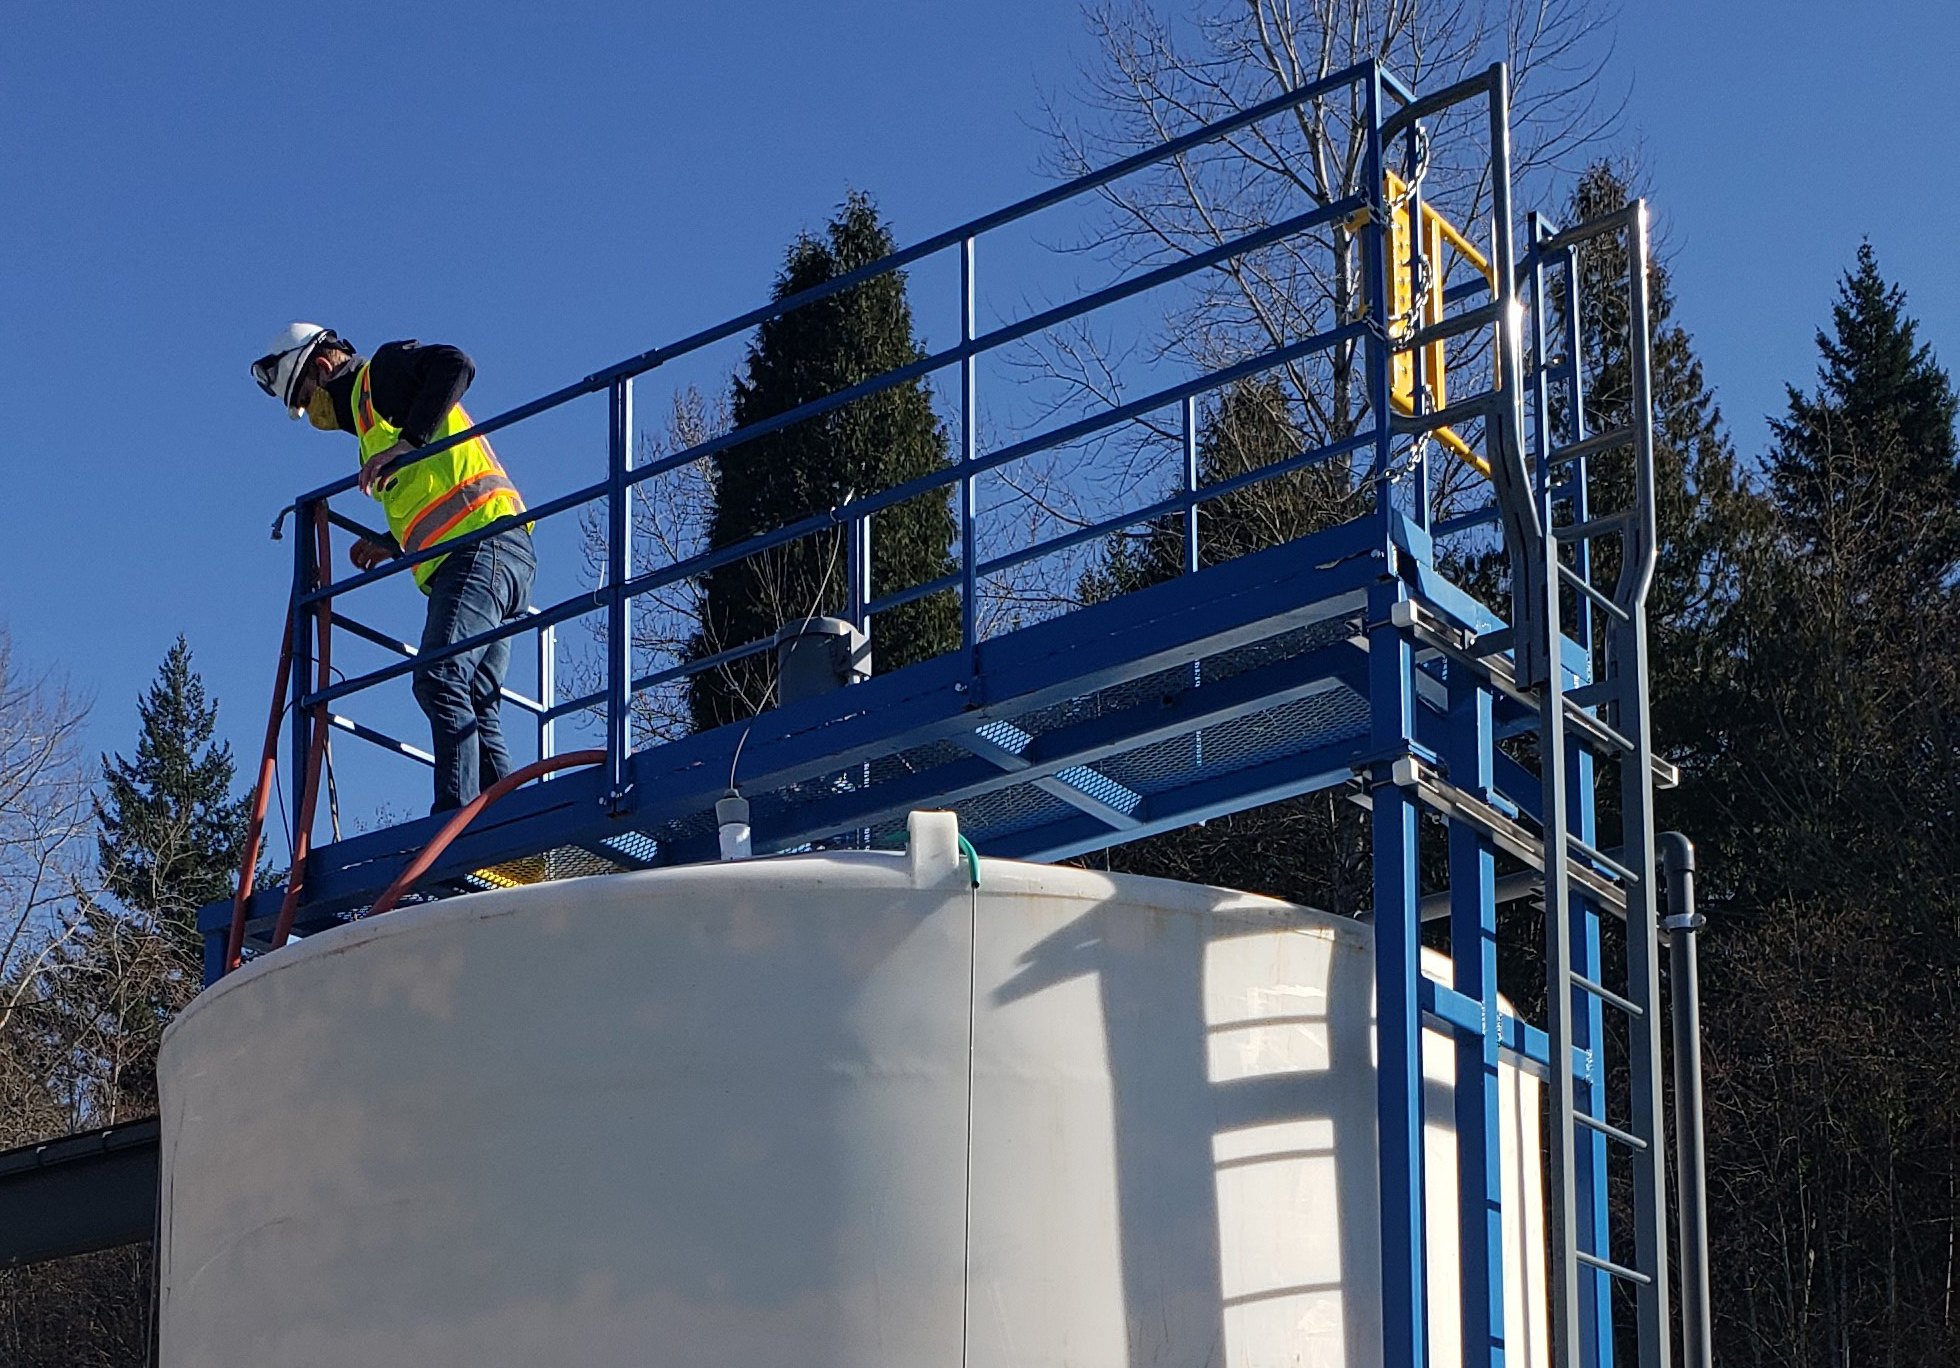 A worker in a safety vest, hardhat, and mask, inspects the magnesium hydroxide tank at the Brightwater treatment plant. The person is standing on blue scaffolding above the big, white tank